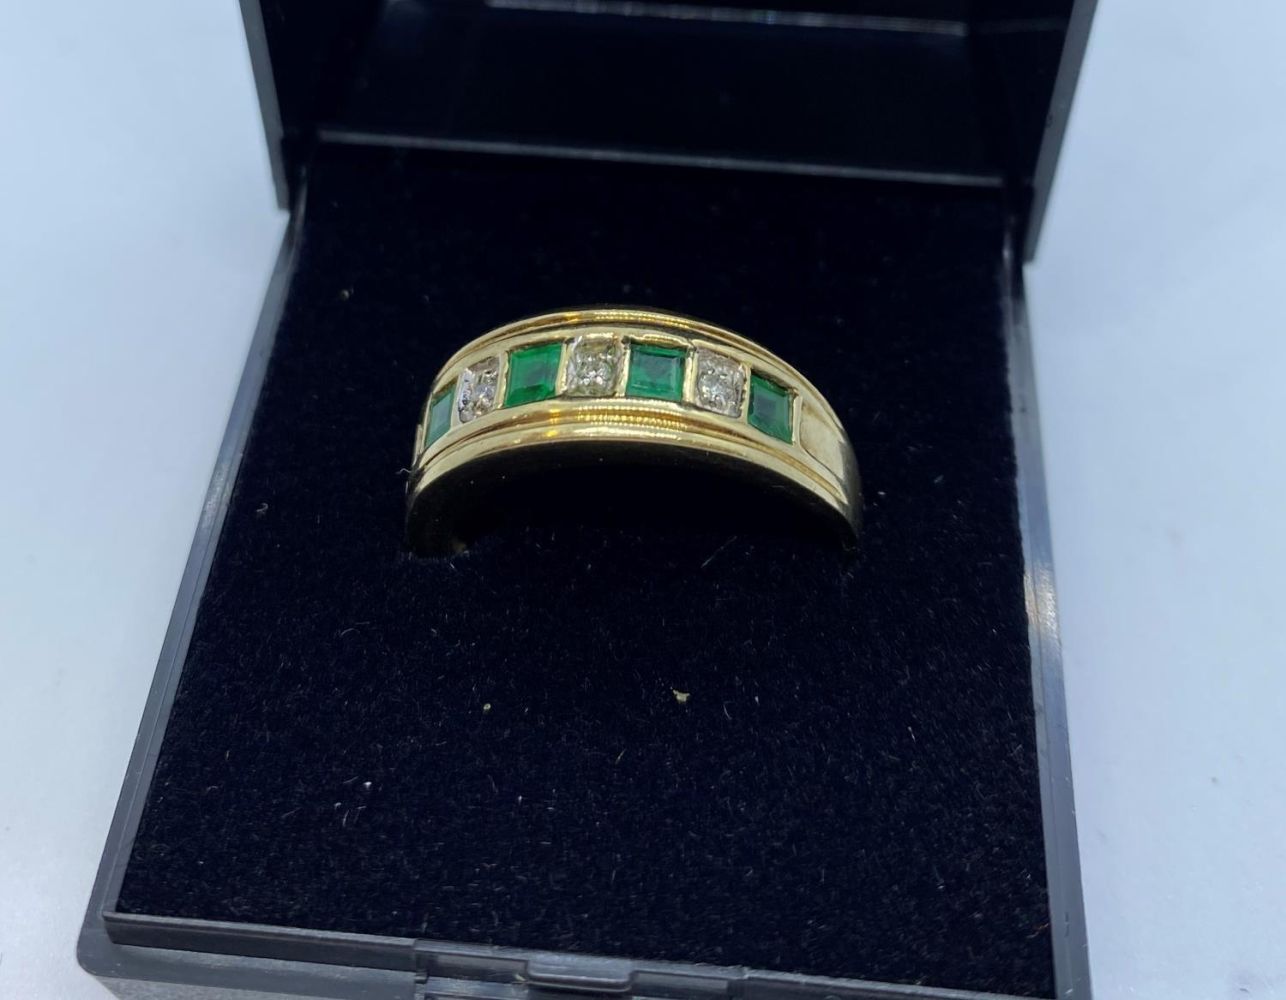 Stone Set Gold Ring Having Emeralds and Diamonds to Top in a Half Eternity Type Setting. 9 Carat